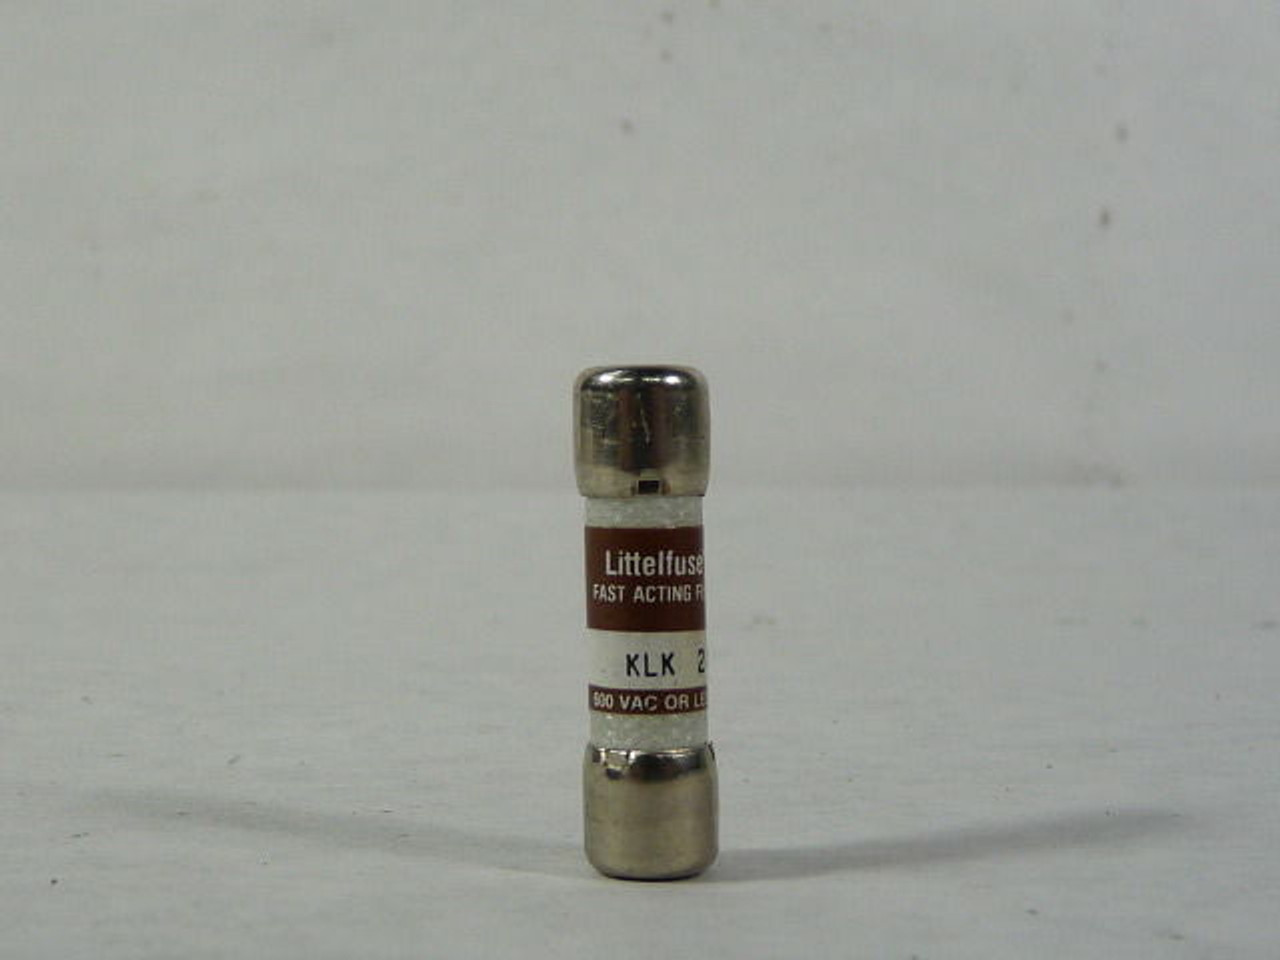 Littelfuse KLK-2A Fast Acting Fuse 2A 600V USED